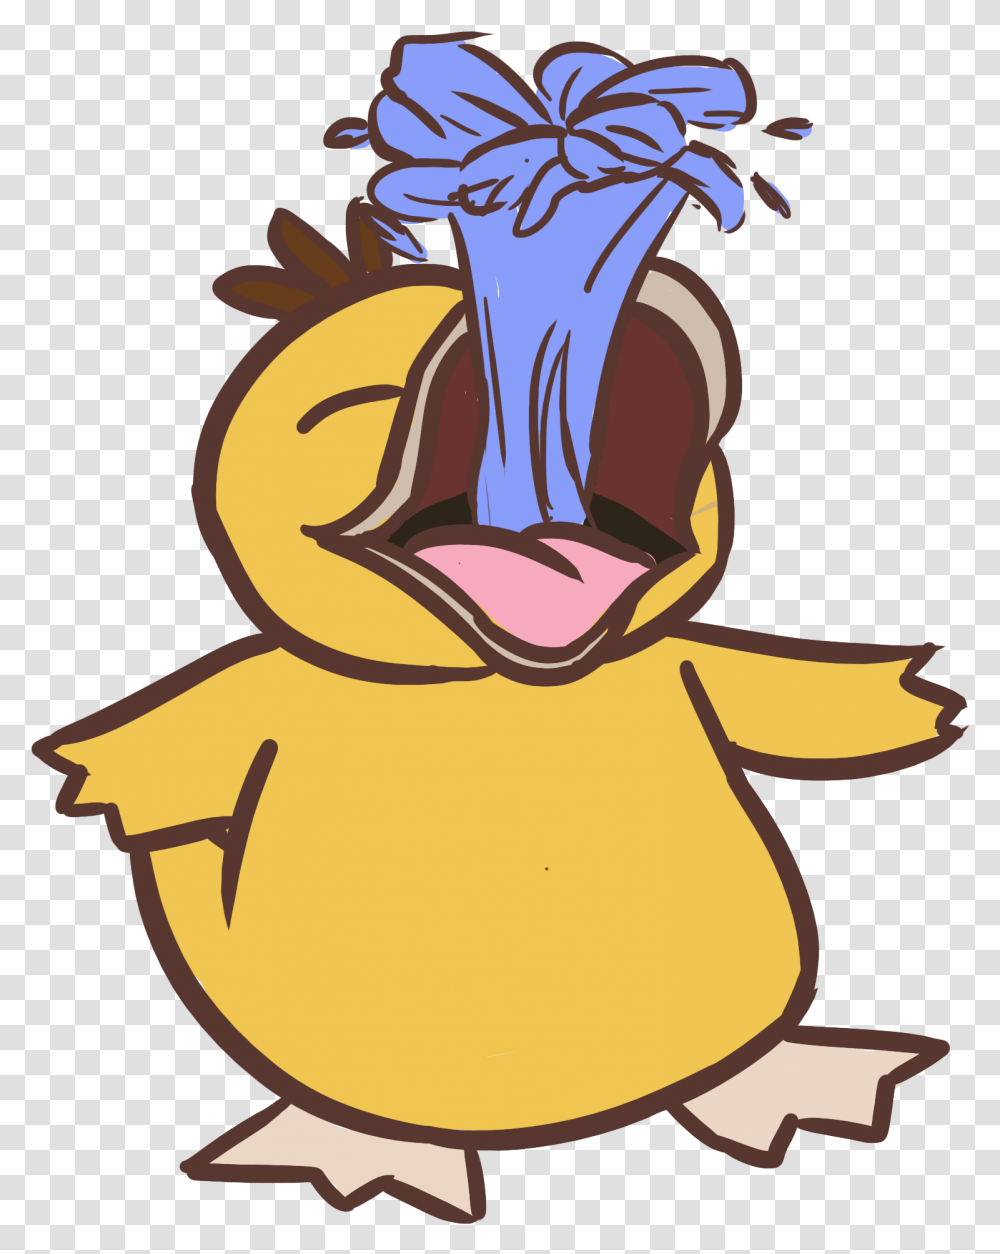 Psyduck Used Water Gun By Cynthistic Psyduck, Animal, Bird, Plant, Food Transparent Png